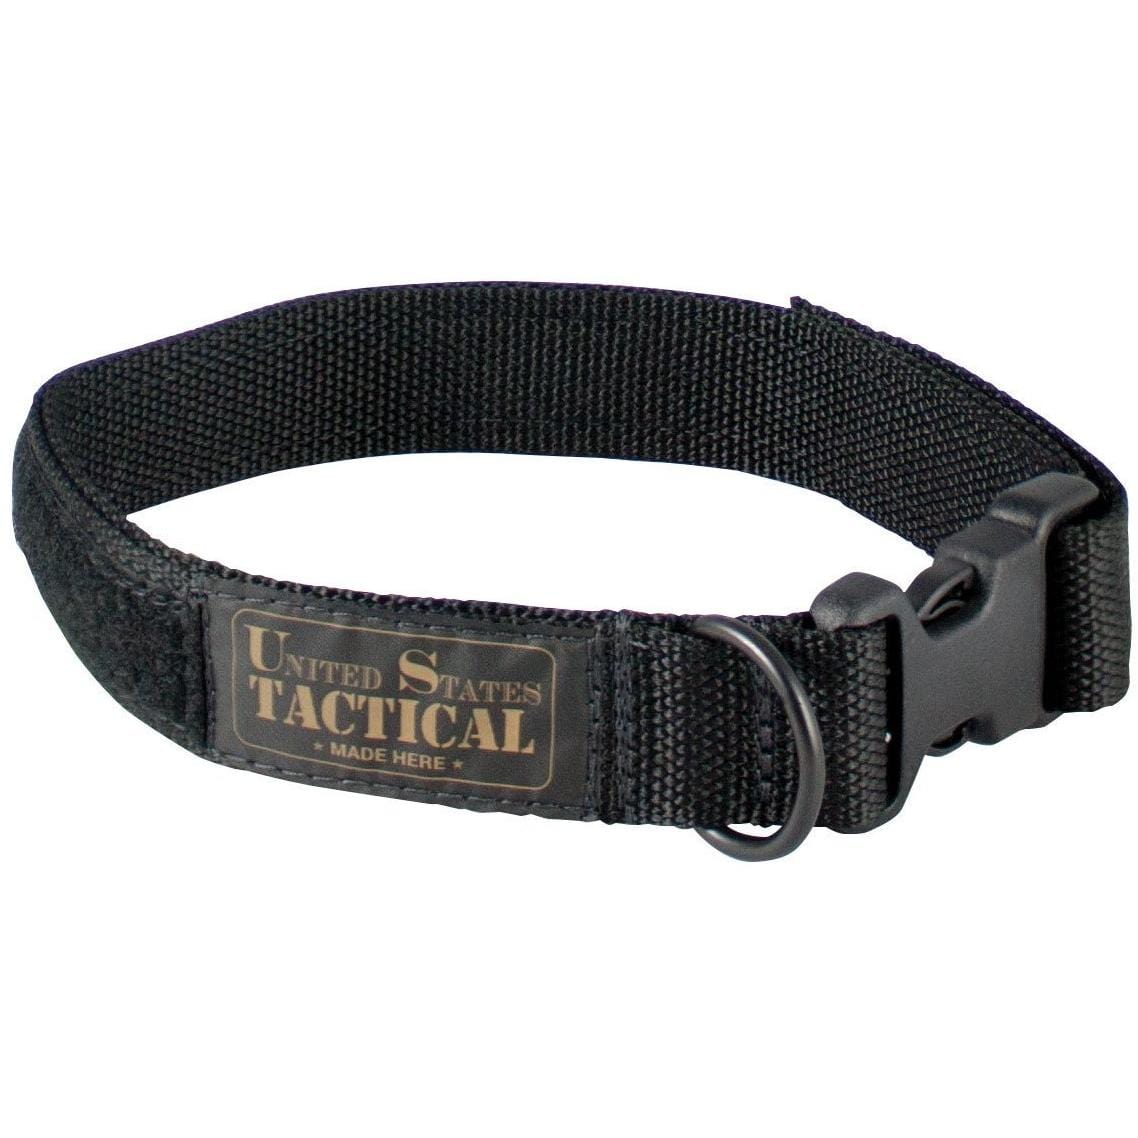 United States Tactical Tactical Gear M / Black United States Tactical Dog Collar with Quick-Release Buckle